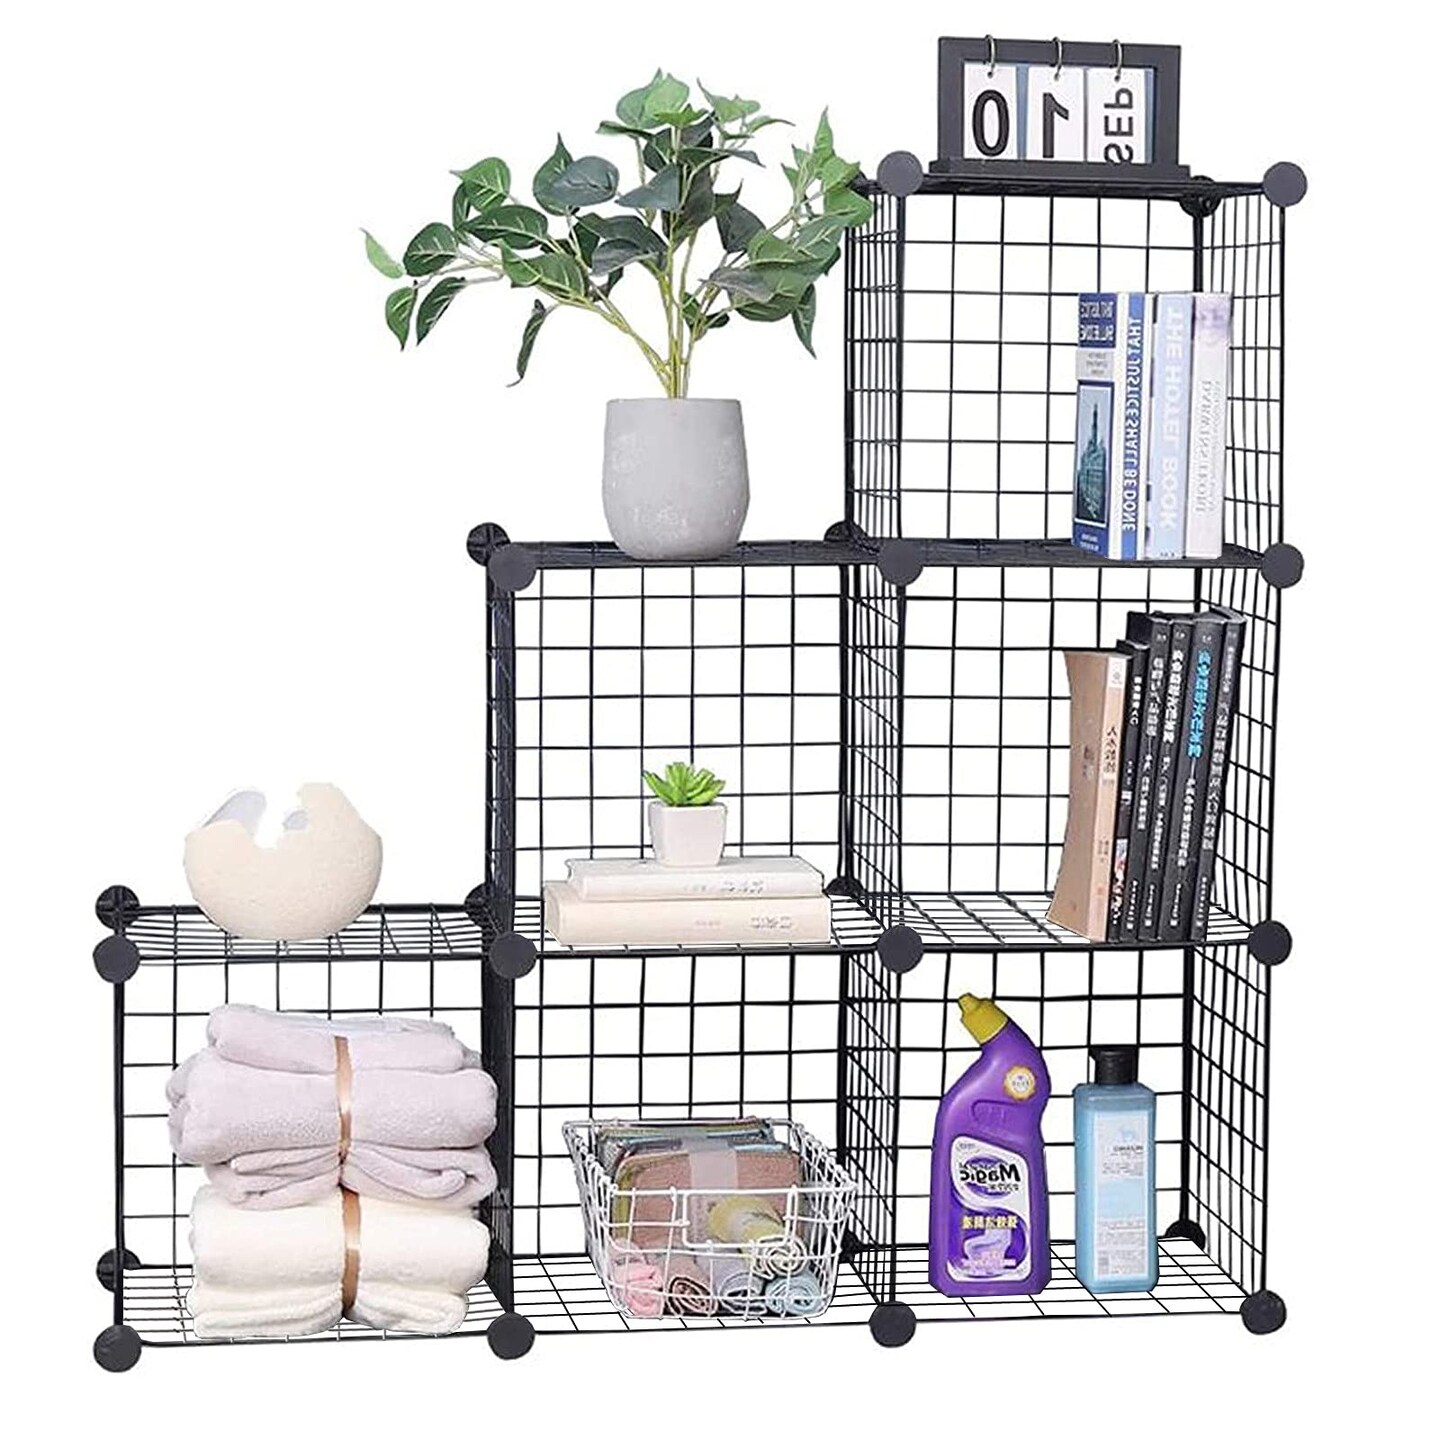 YCOCO Cube Storage Organizer,6 Cube Closet Organizers and Storage,Wire Metal Grids Bookshelf,Stackable Modular Shelves,Cube Storage Organizer Bins for Home,Office,Kids Room,Black